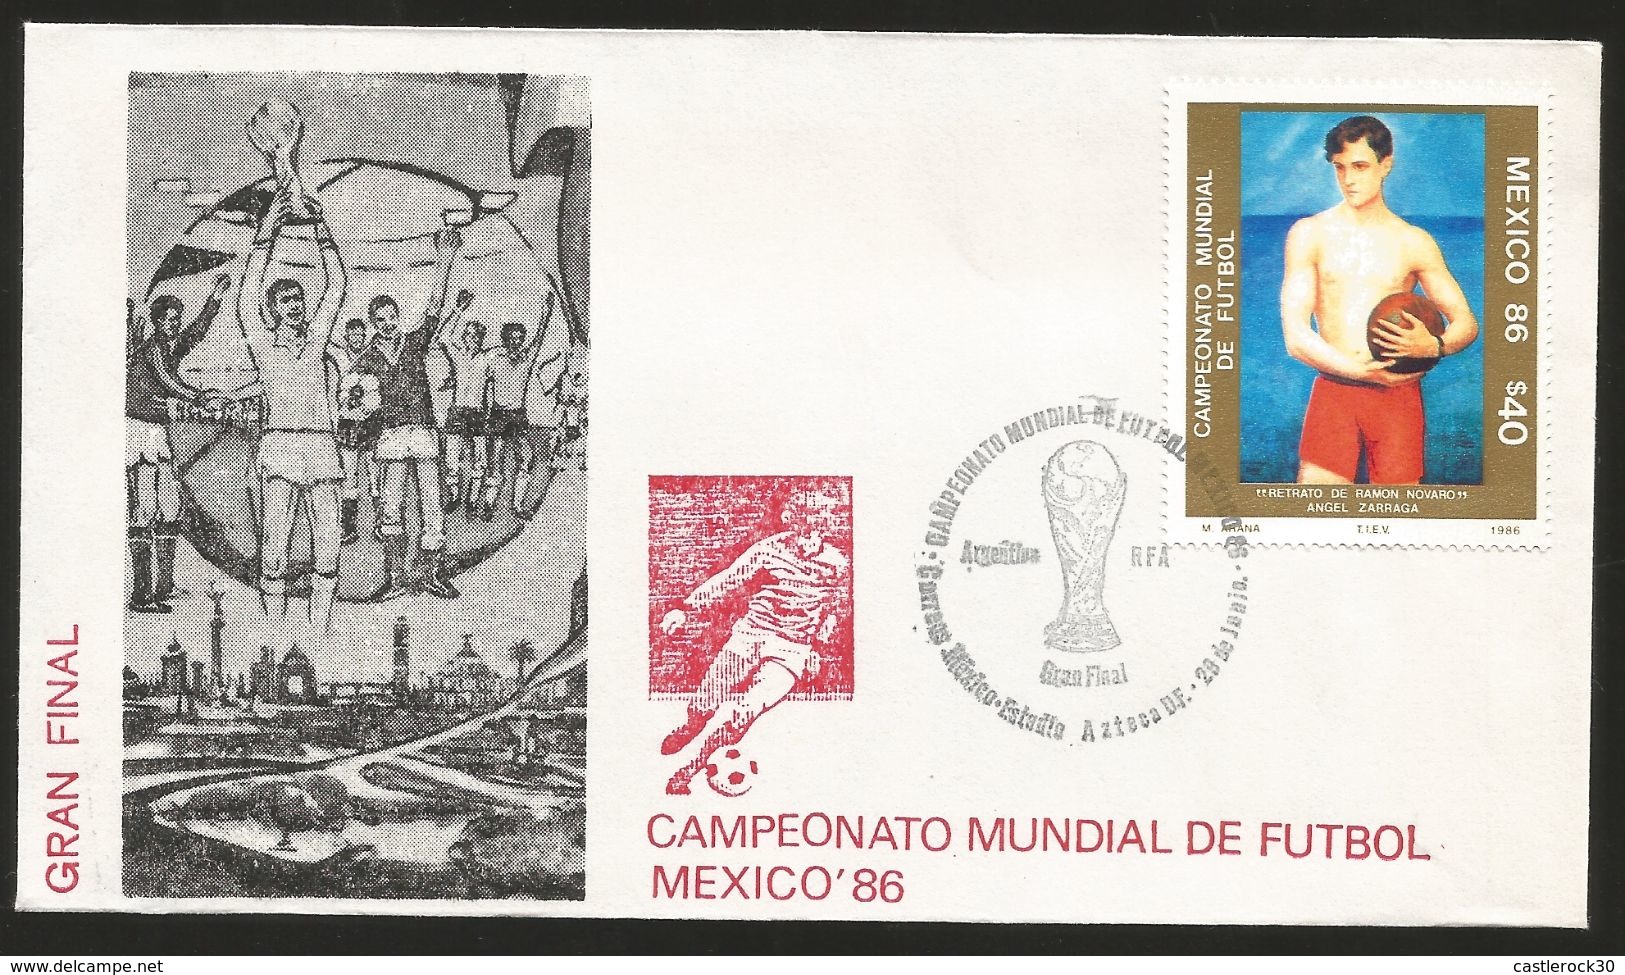 J) 1986 MEXICO, WORLD MEXICO SOCCER CHAMPIONSHIP 86, MAP, FLAG, CUP, GRAND FINALE, DIMANCHE, PORTRAIT OF ERNEST CHARLES - Mexico